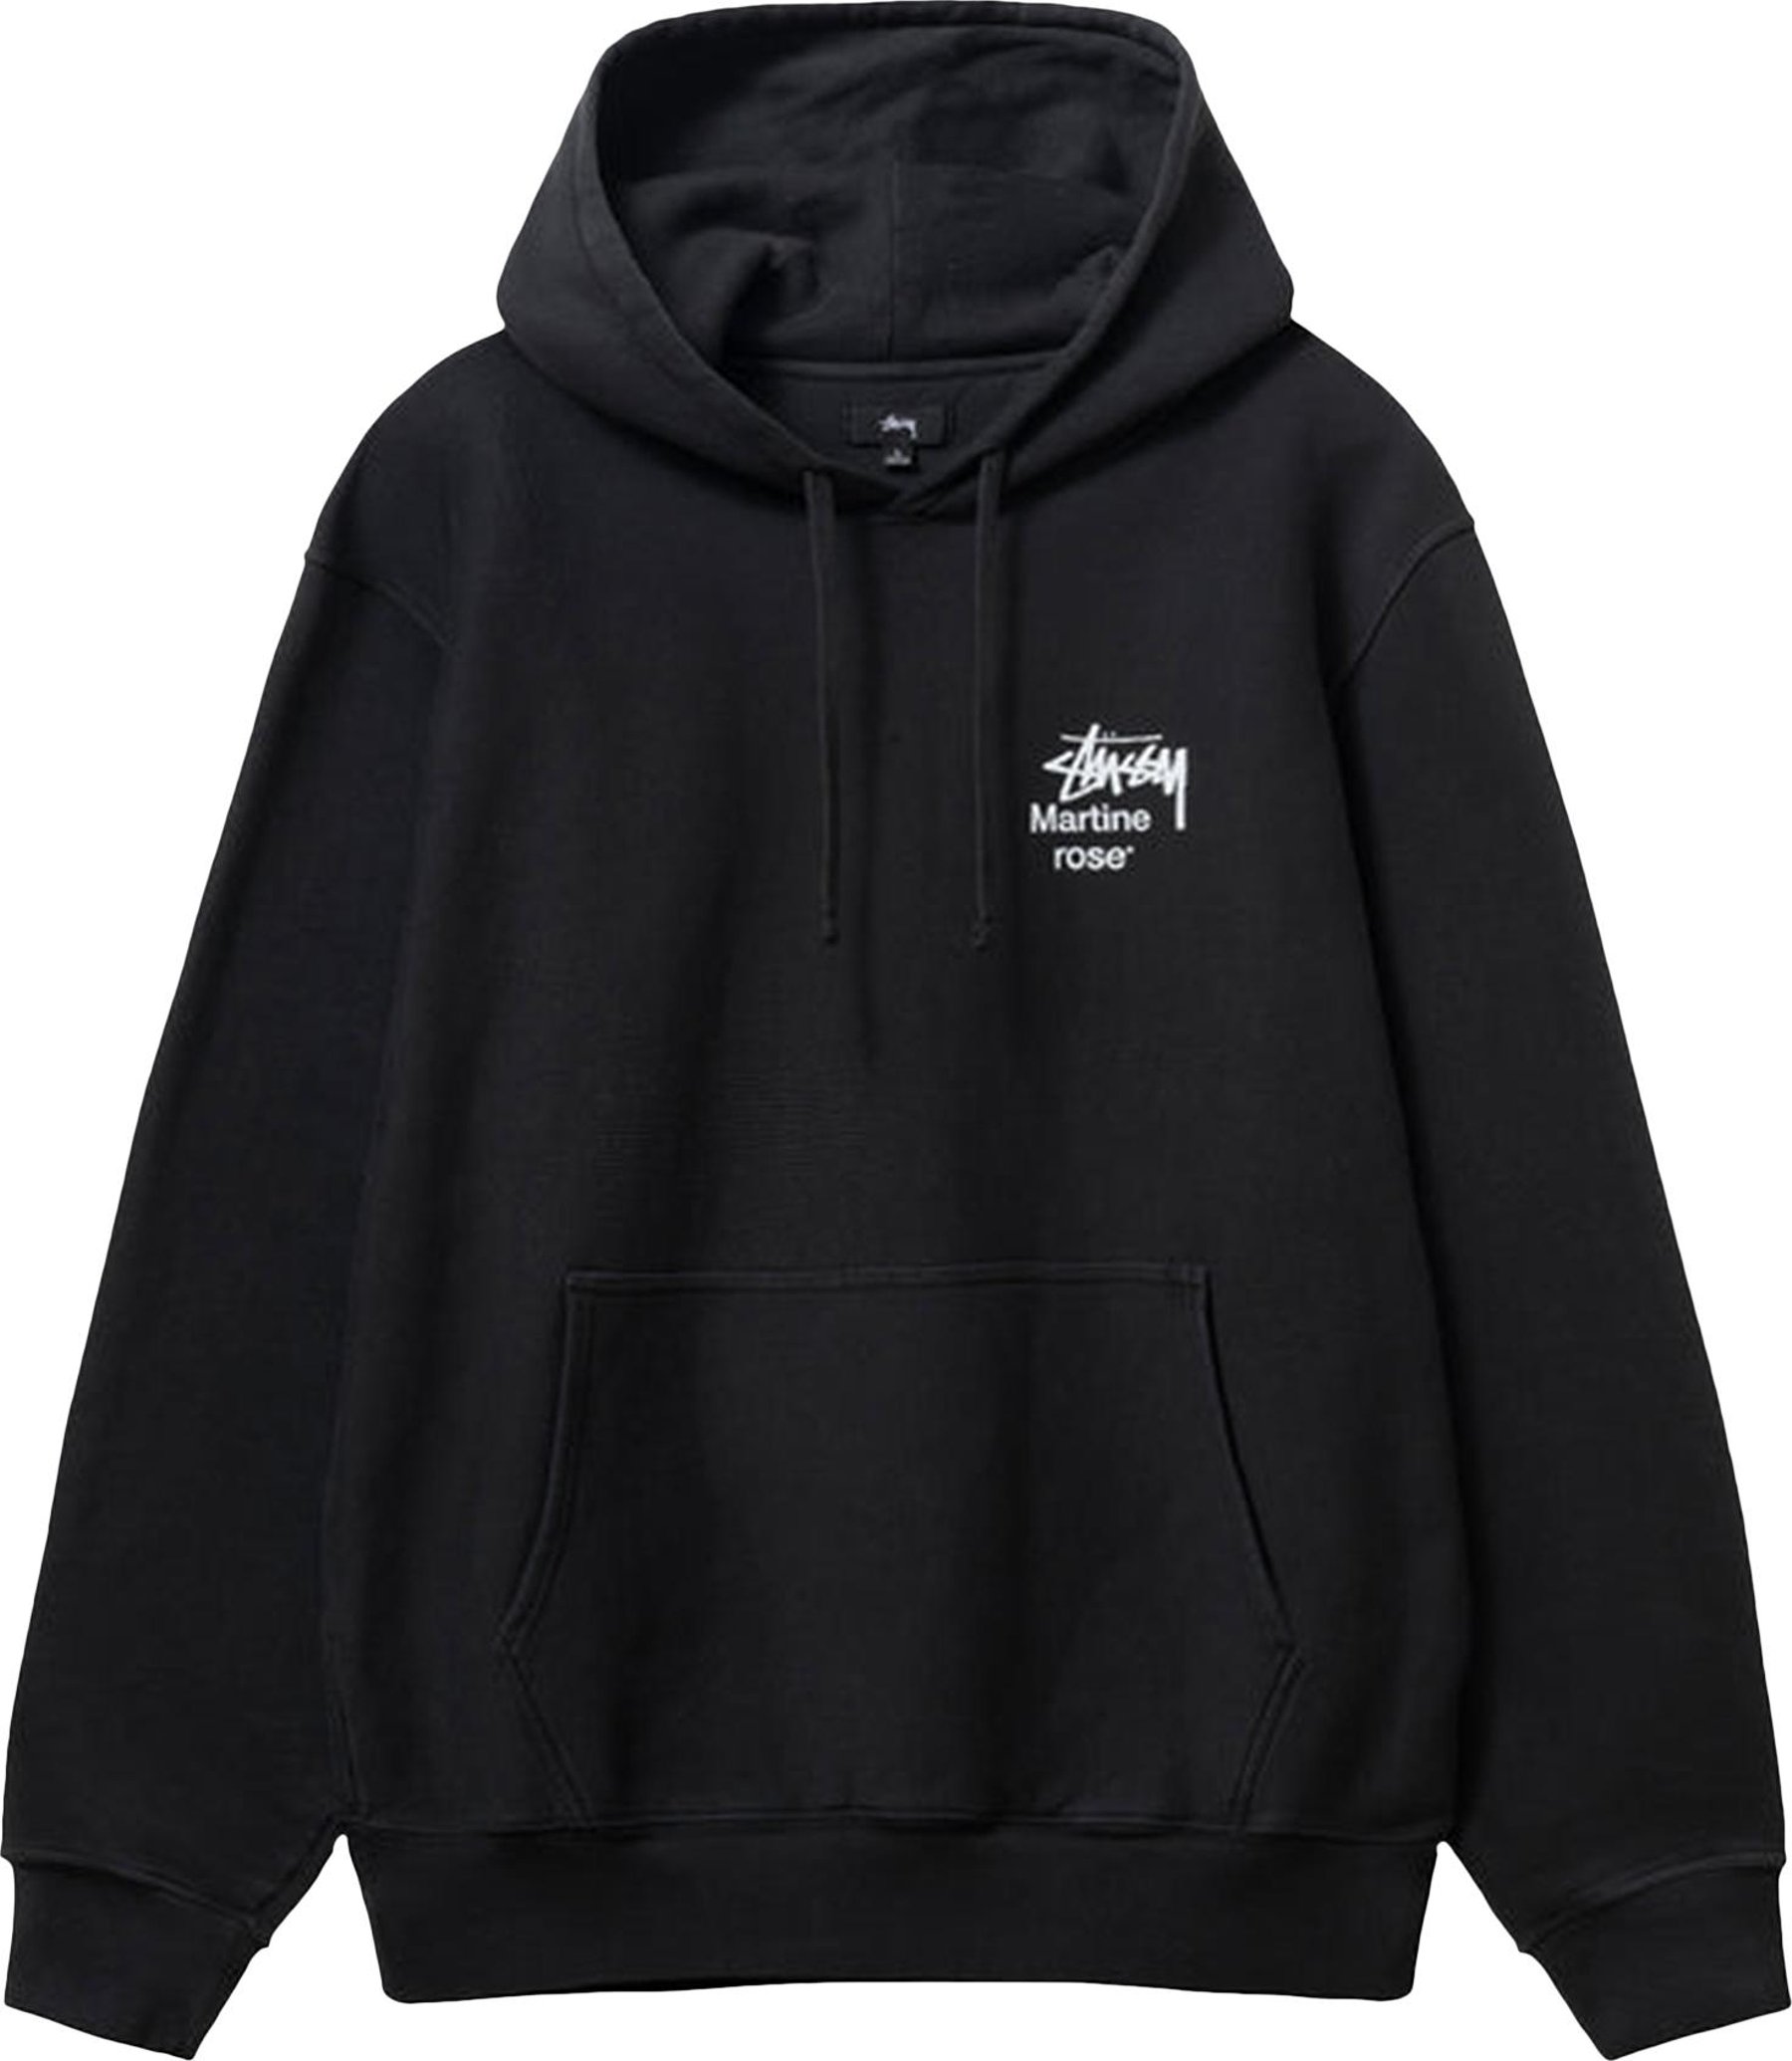 Stussy x Martine Rose Collage Pigment Dyed Hoodie 'Black' | GOAT